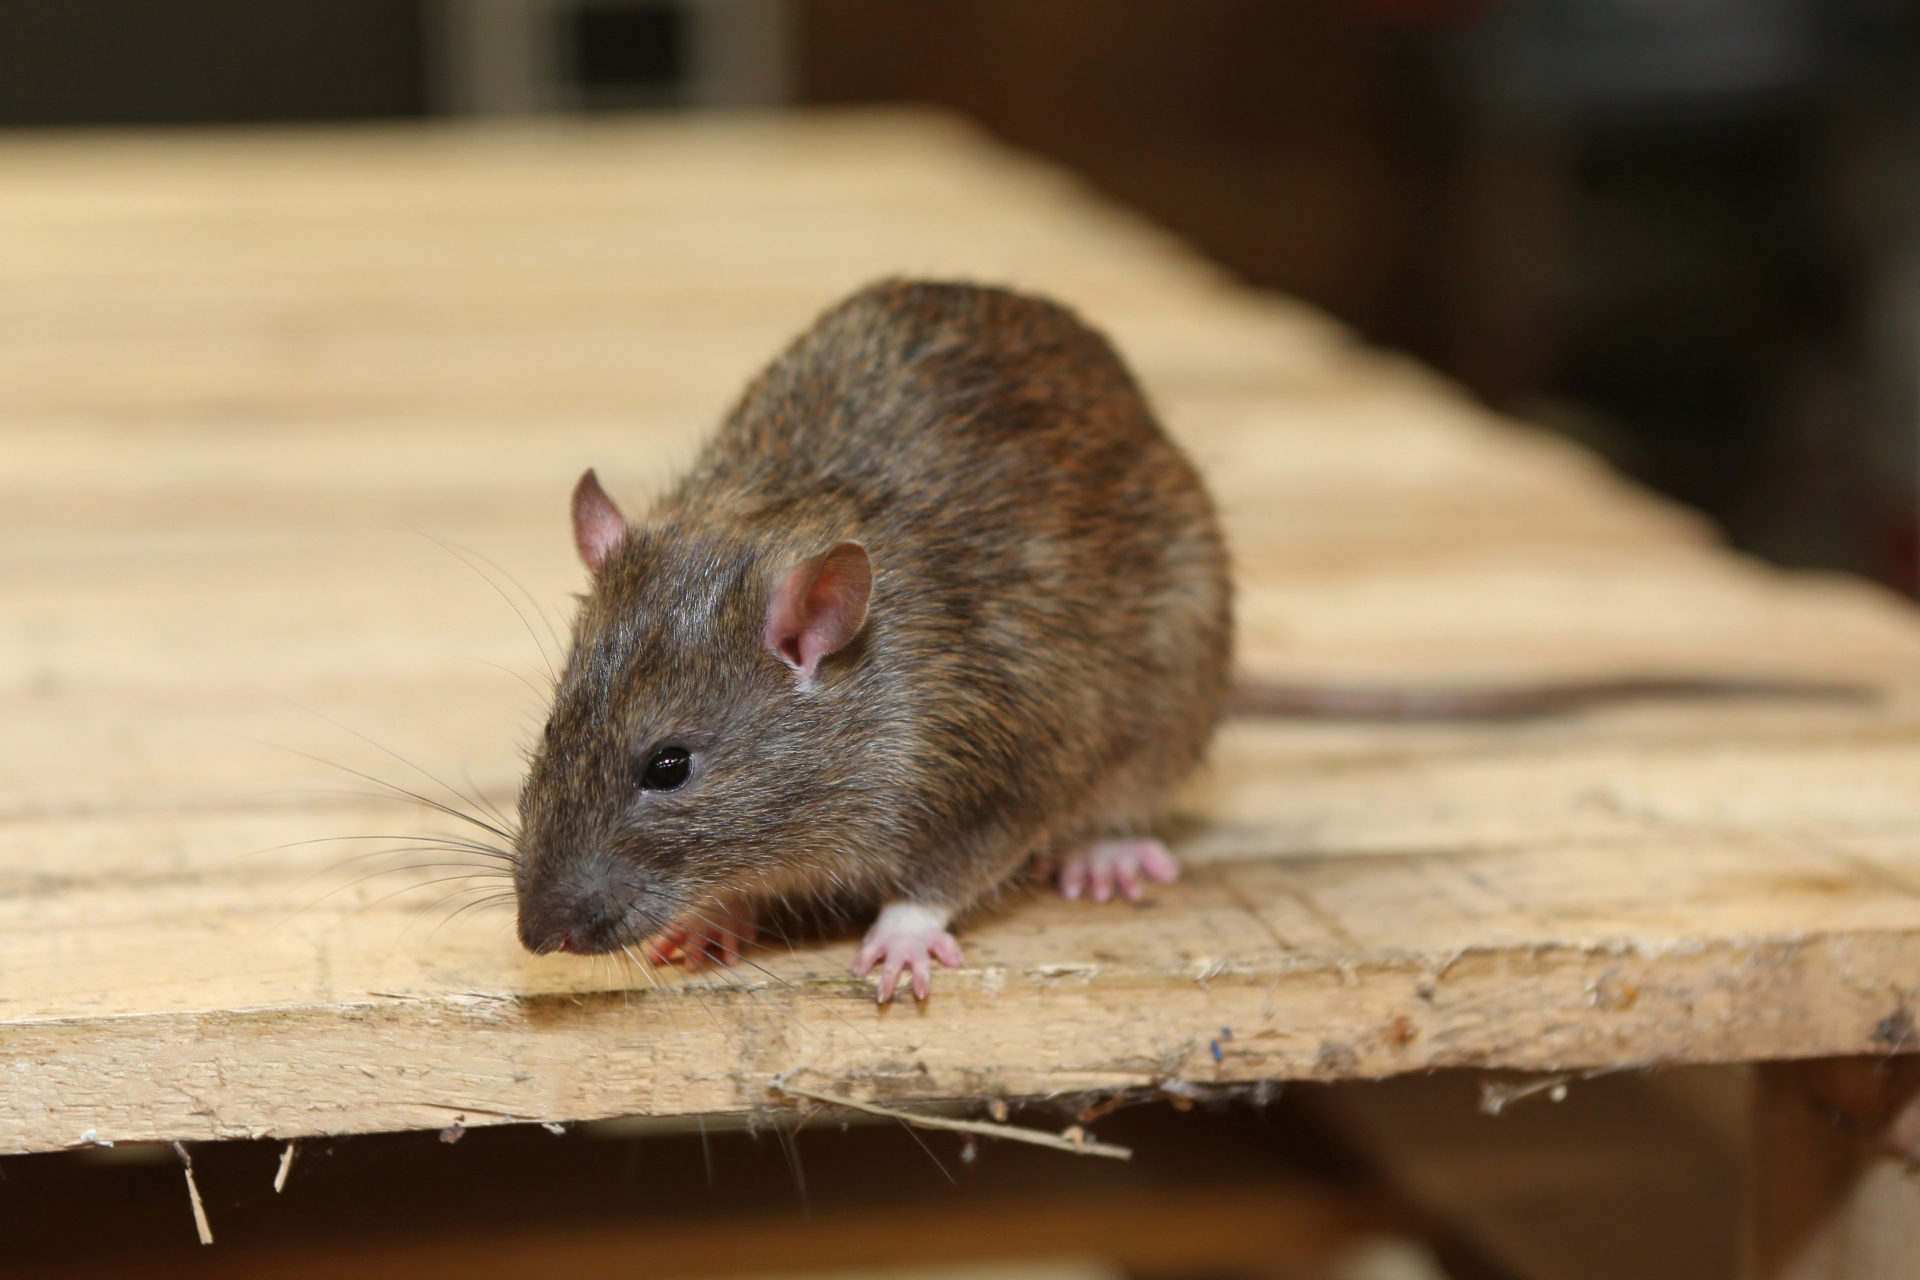 Rat Infestation, Pest Control in Ewell, Stoneleigh, KT17. Call Now 020 8166 9746